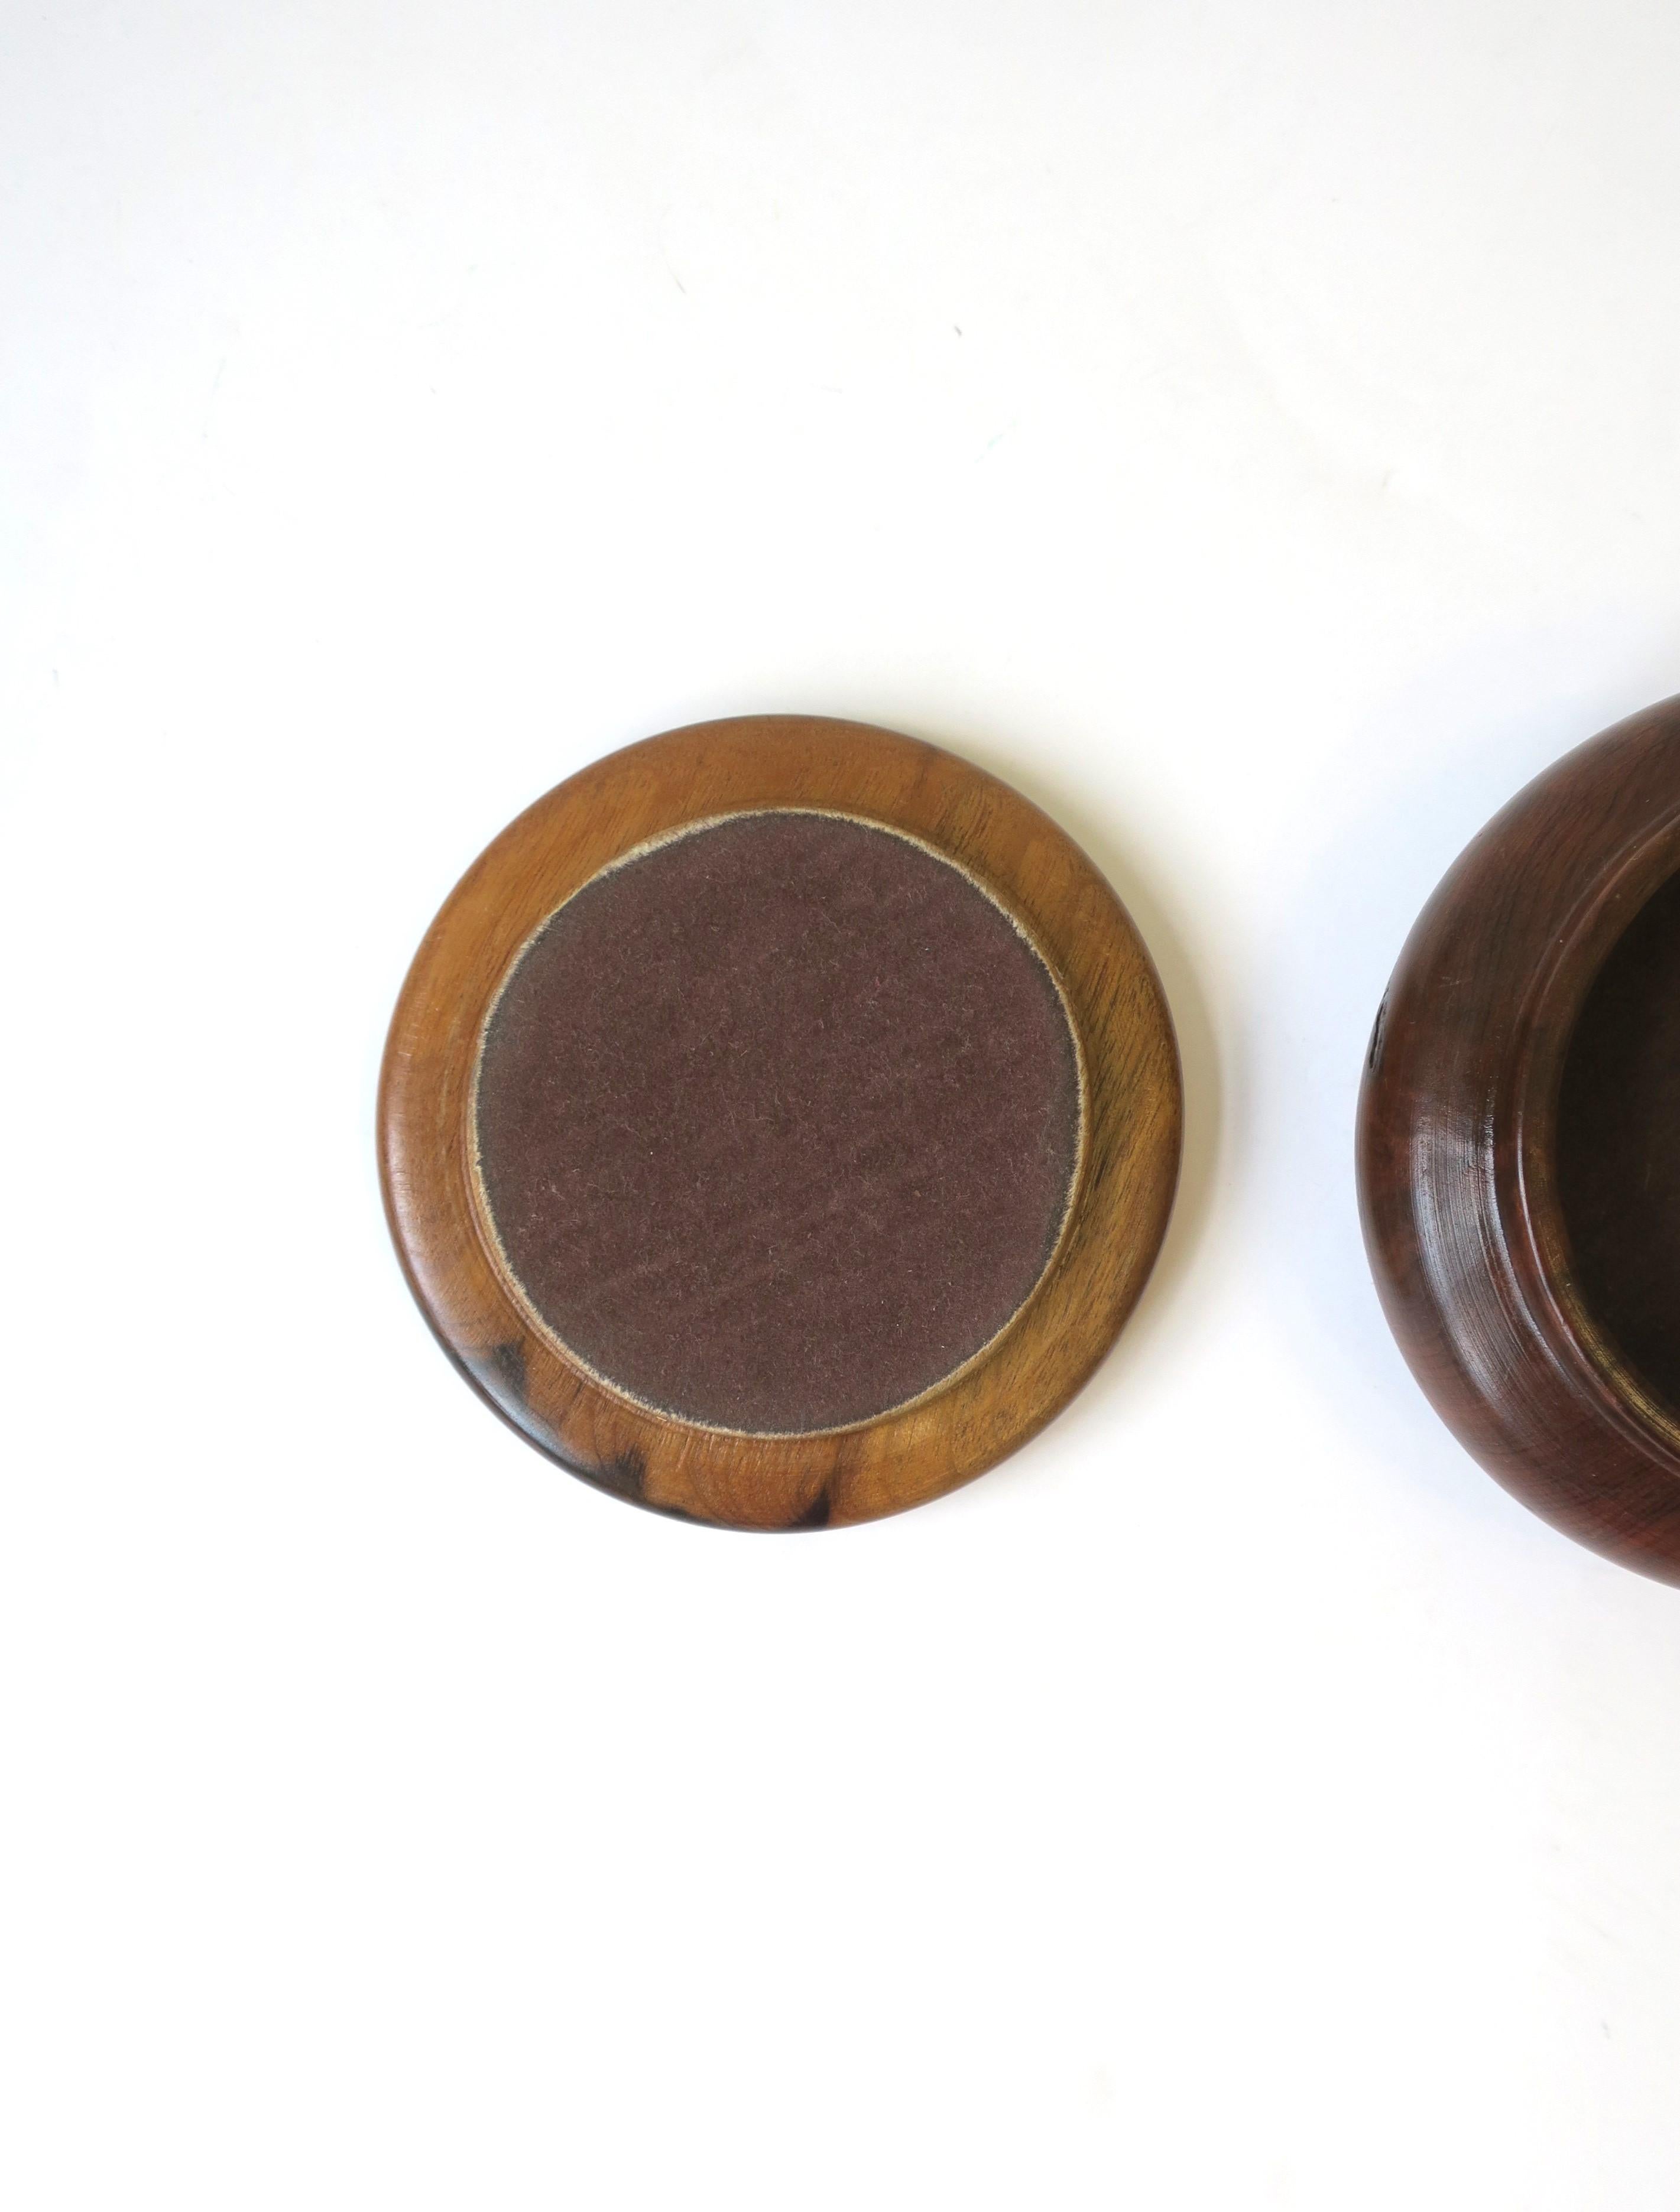 Brazilian Wood and Black Agate Onyx Round Box, Brazil 1980s For Sale 7